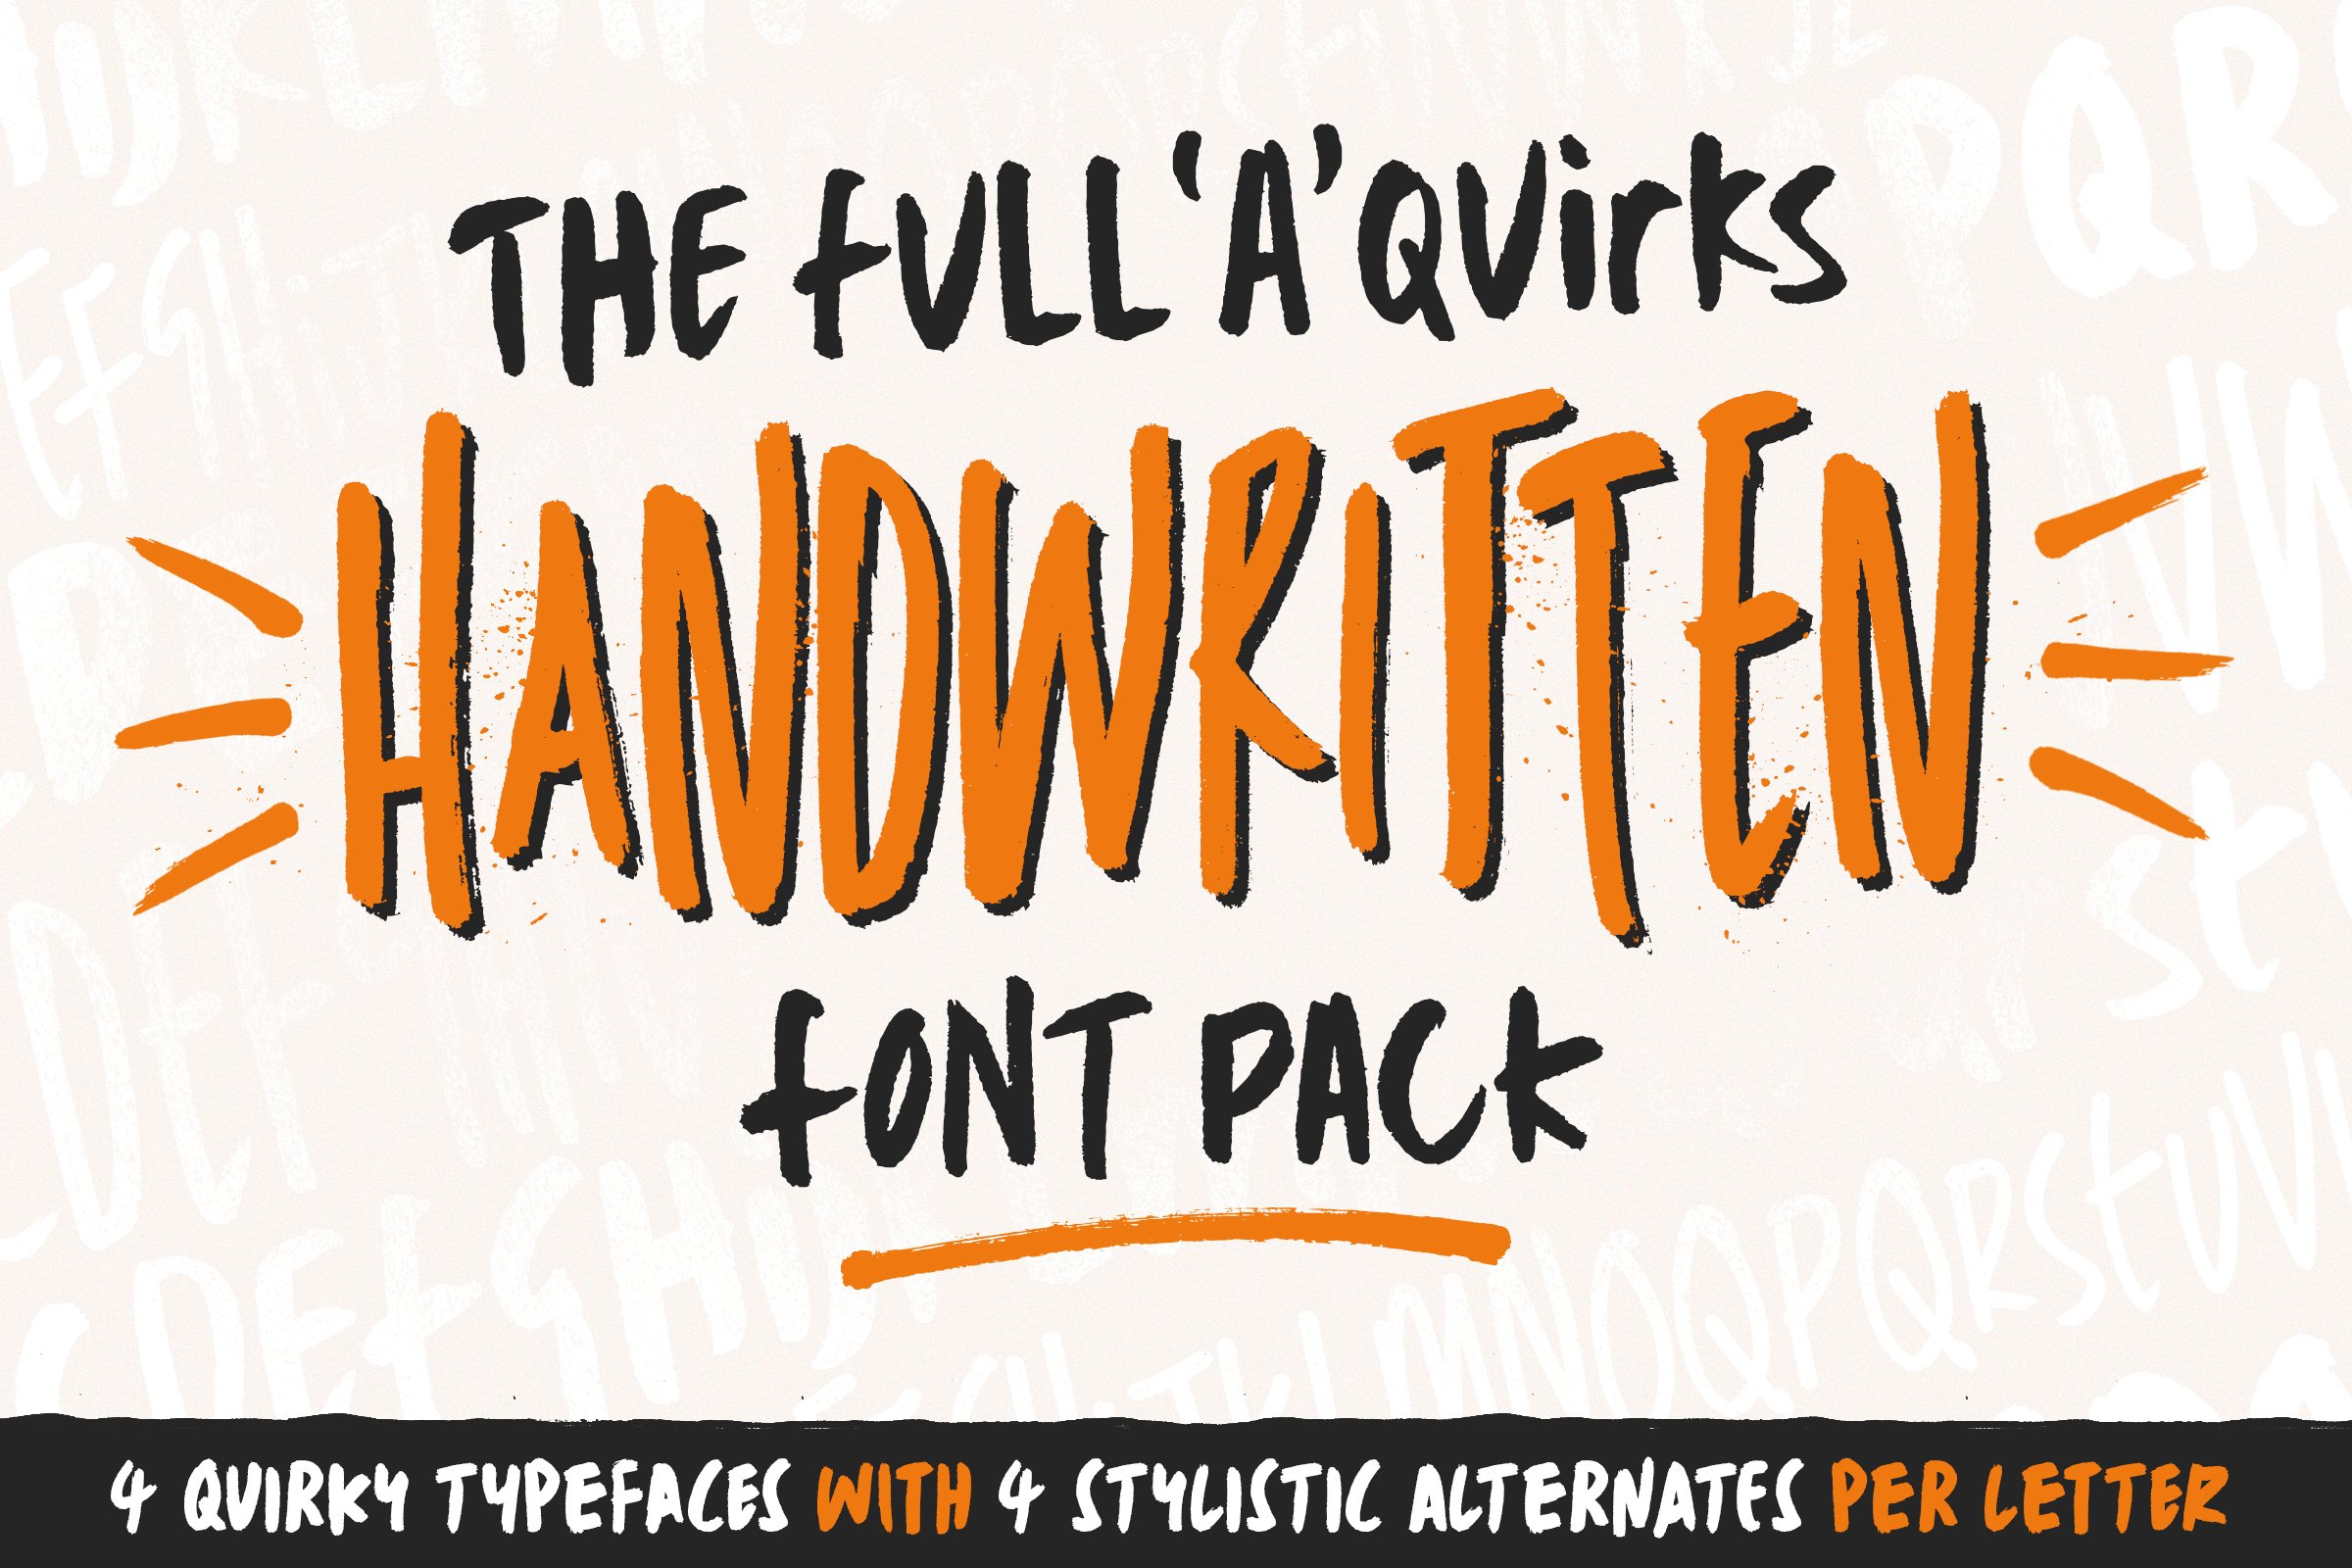 Full'A'Quirks Handwritten Fonts Pack cover image.